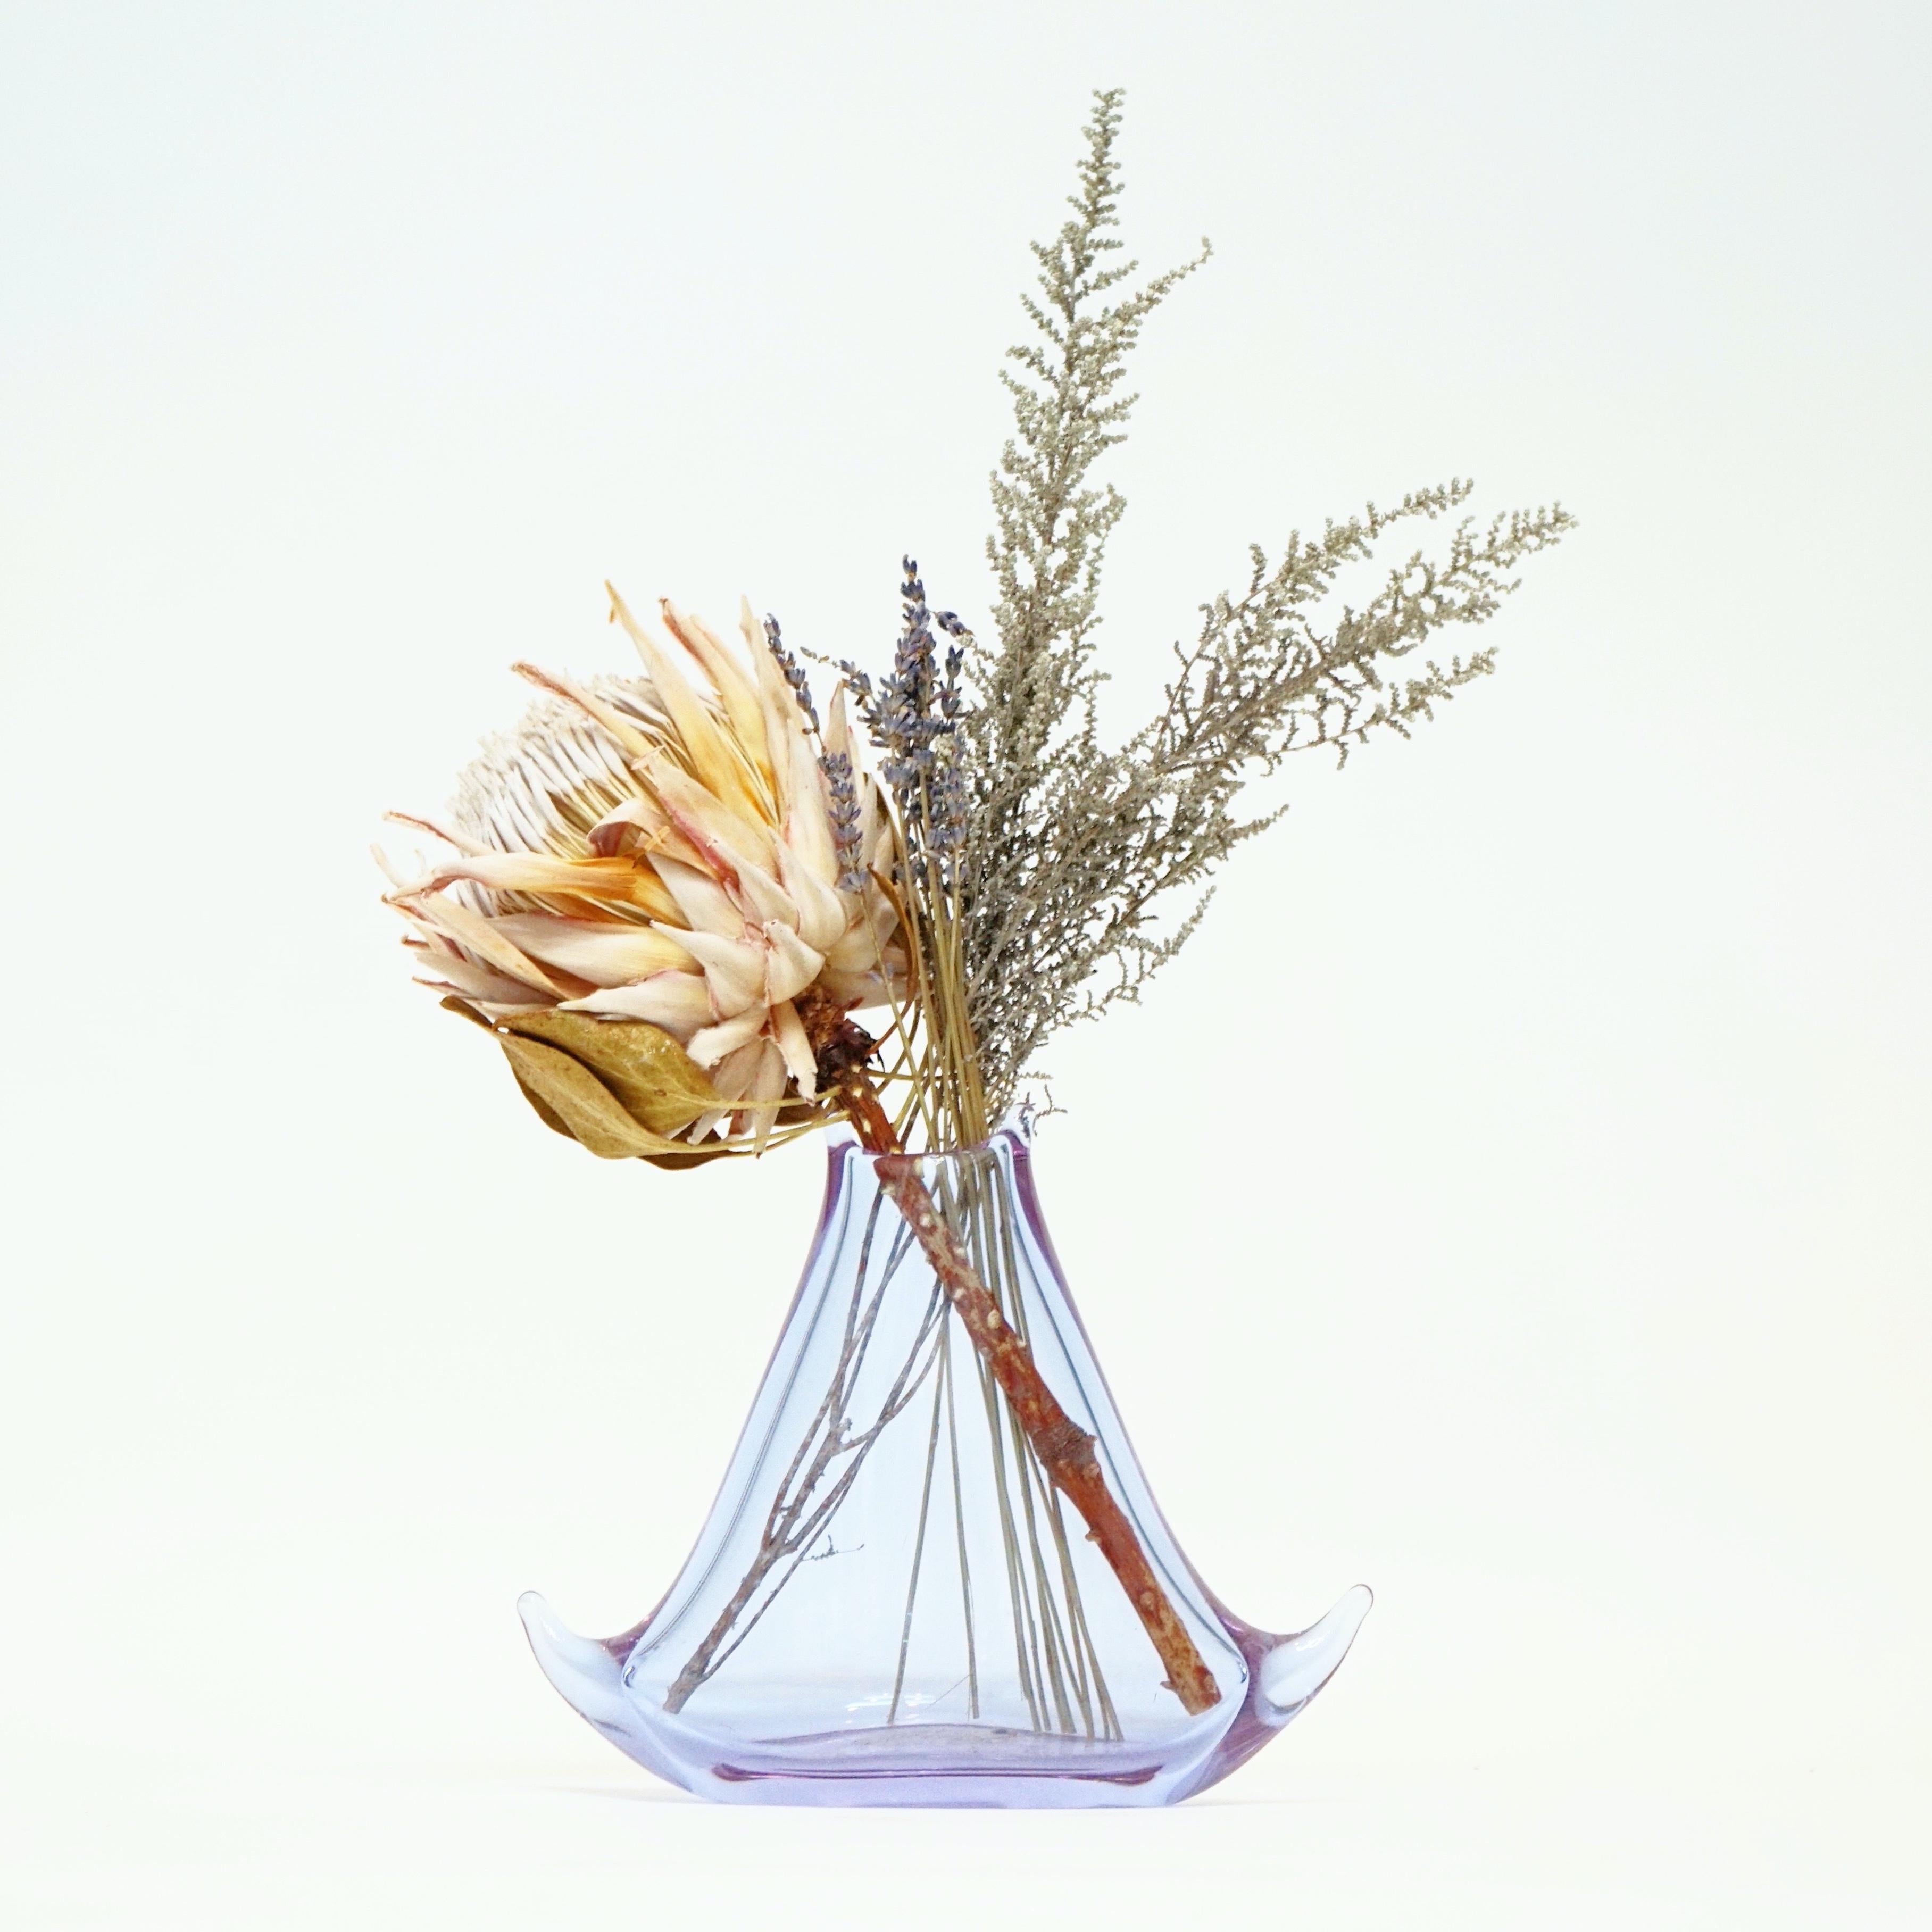 This whimsical vintage Murano glass vase is the perfect way to add a pop of color to your space. Perfect for showcasing dried flower arrangements, excellent in a powder room or entry.

Details:
- Transparent lilac purple Murano glass
- 9.5